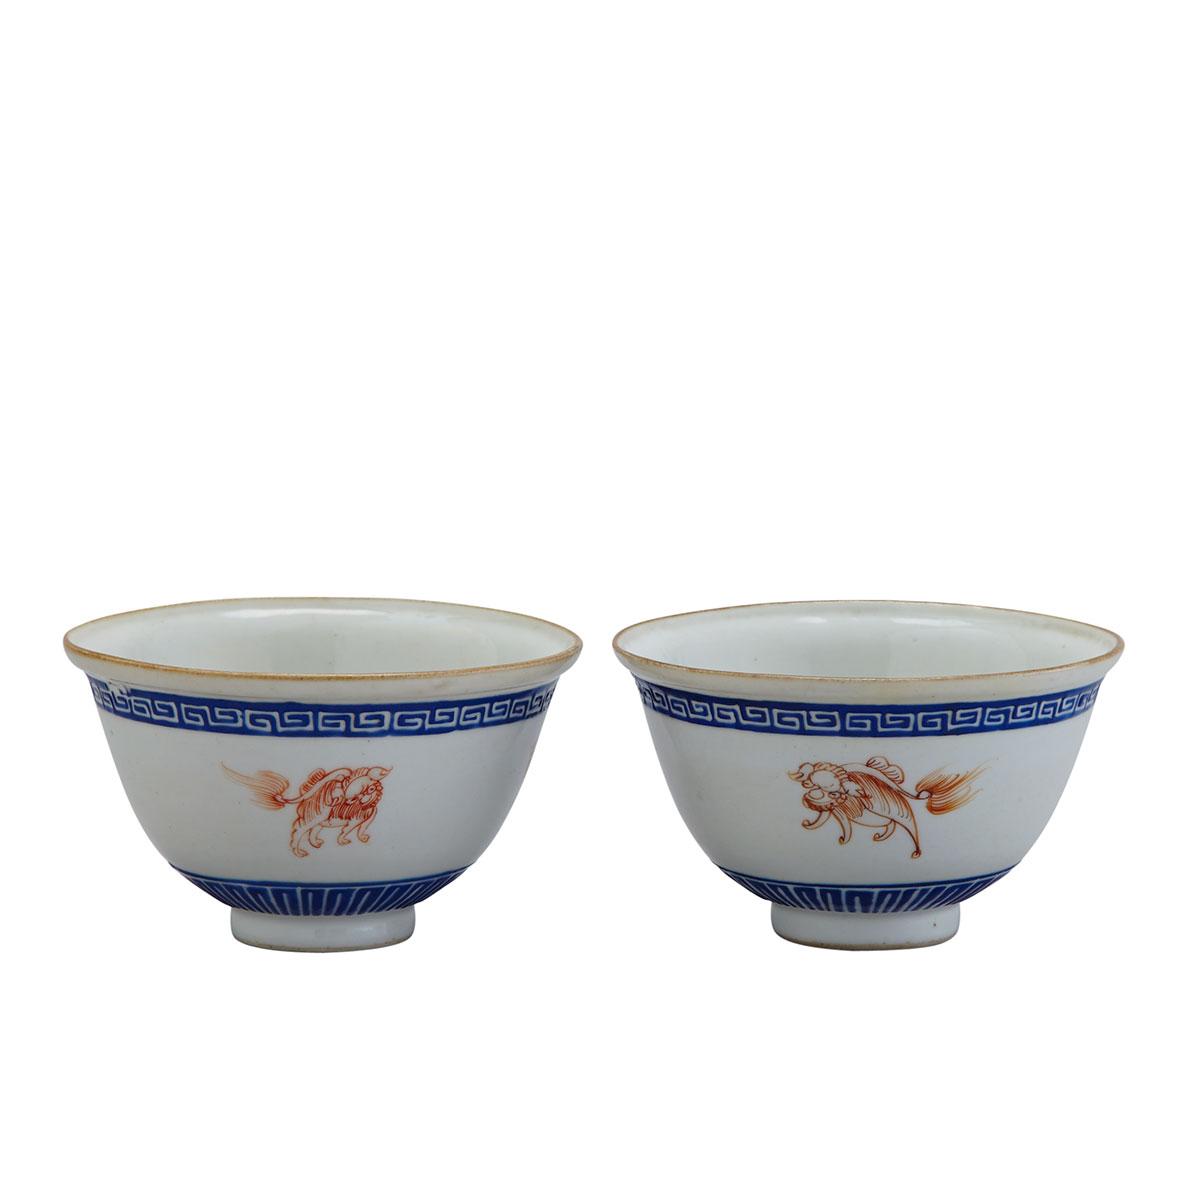 Pair of Famille Rose Tea Cups, Qianlong Mark and Period (1736-1795)